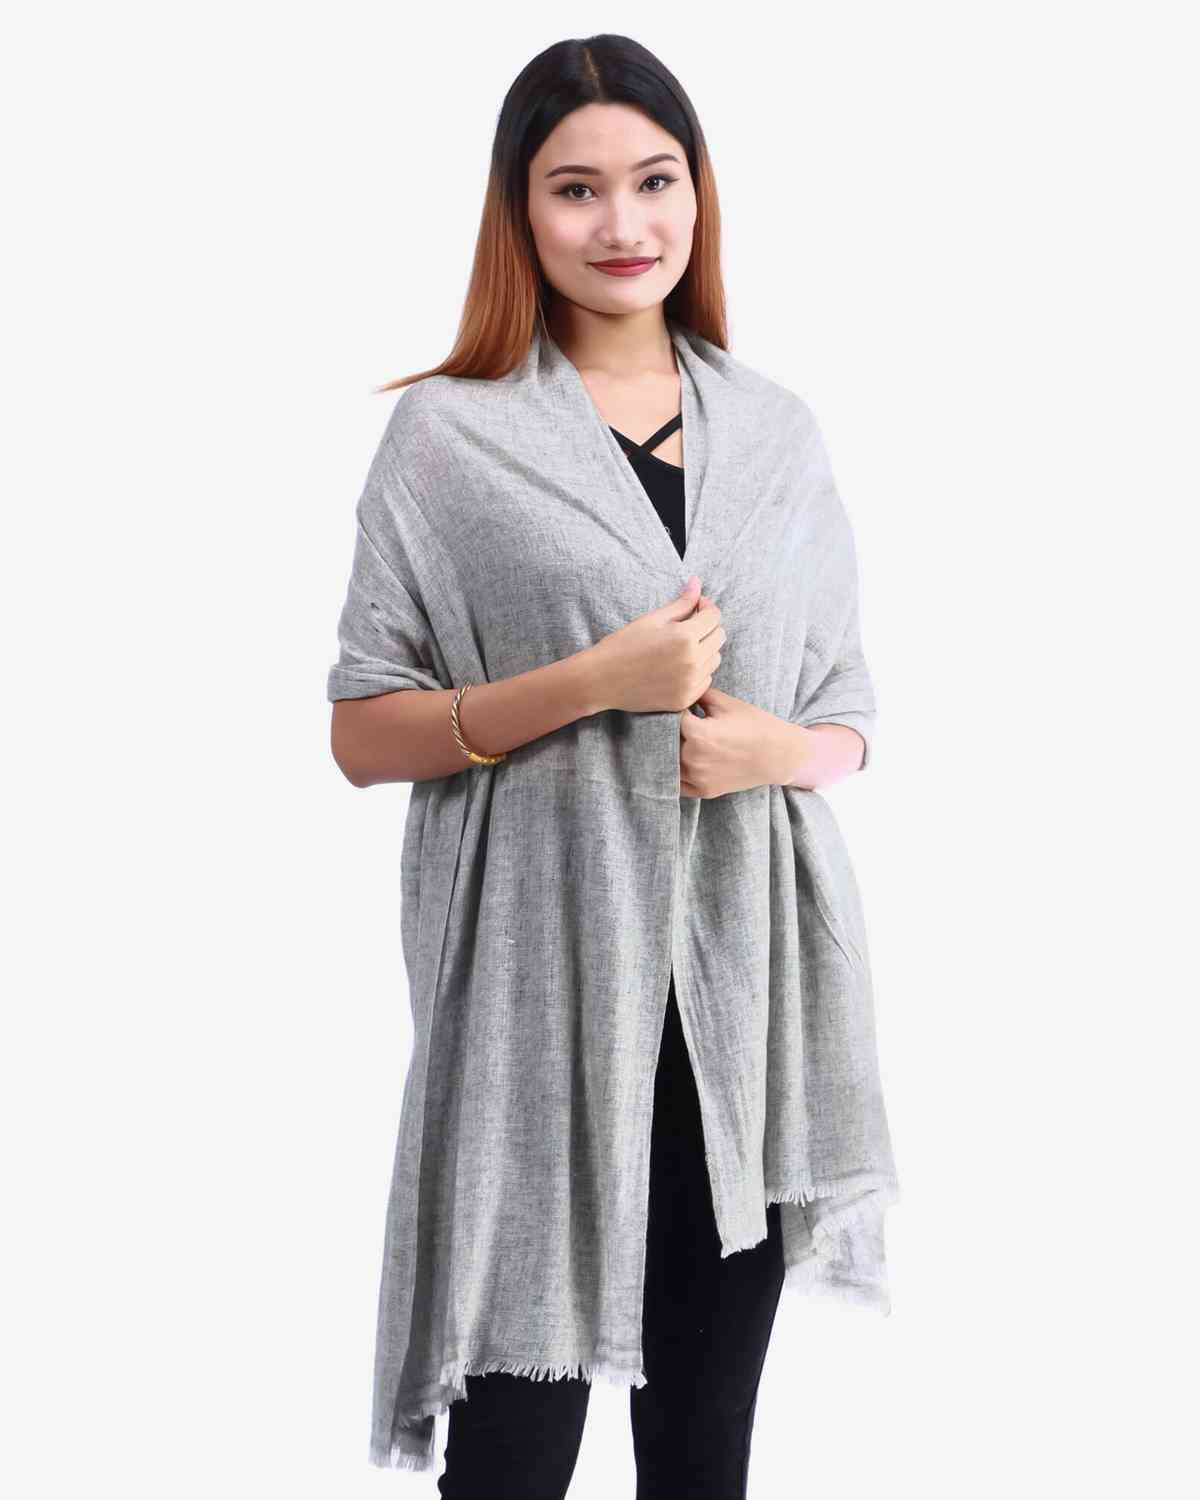 2 Ply 100% Cashmere Scarf. Made in Nepal